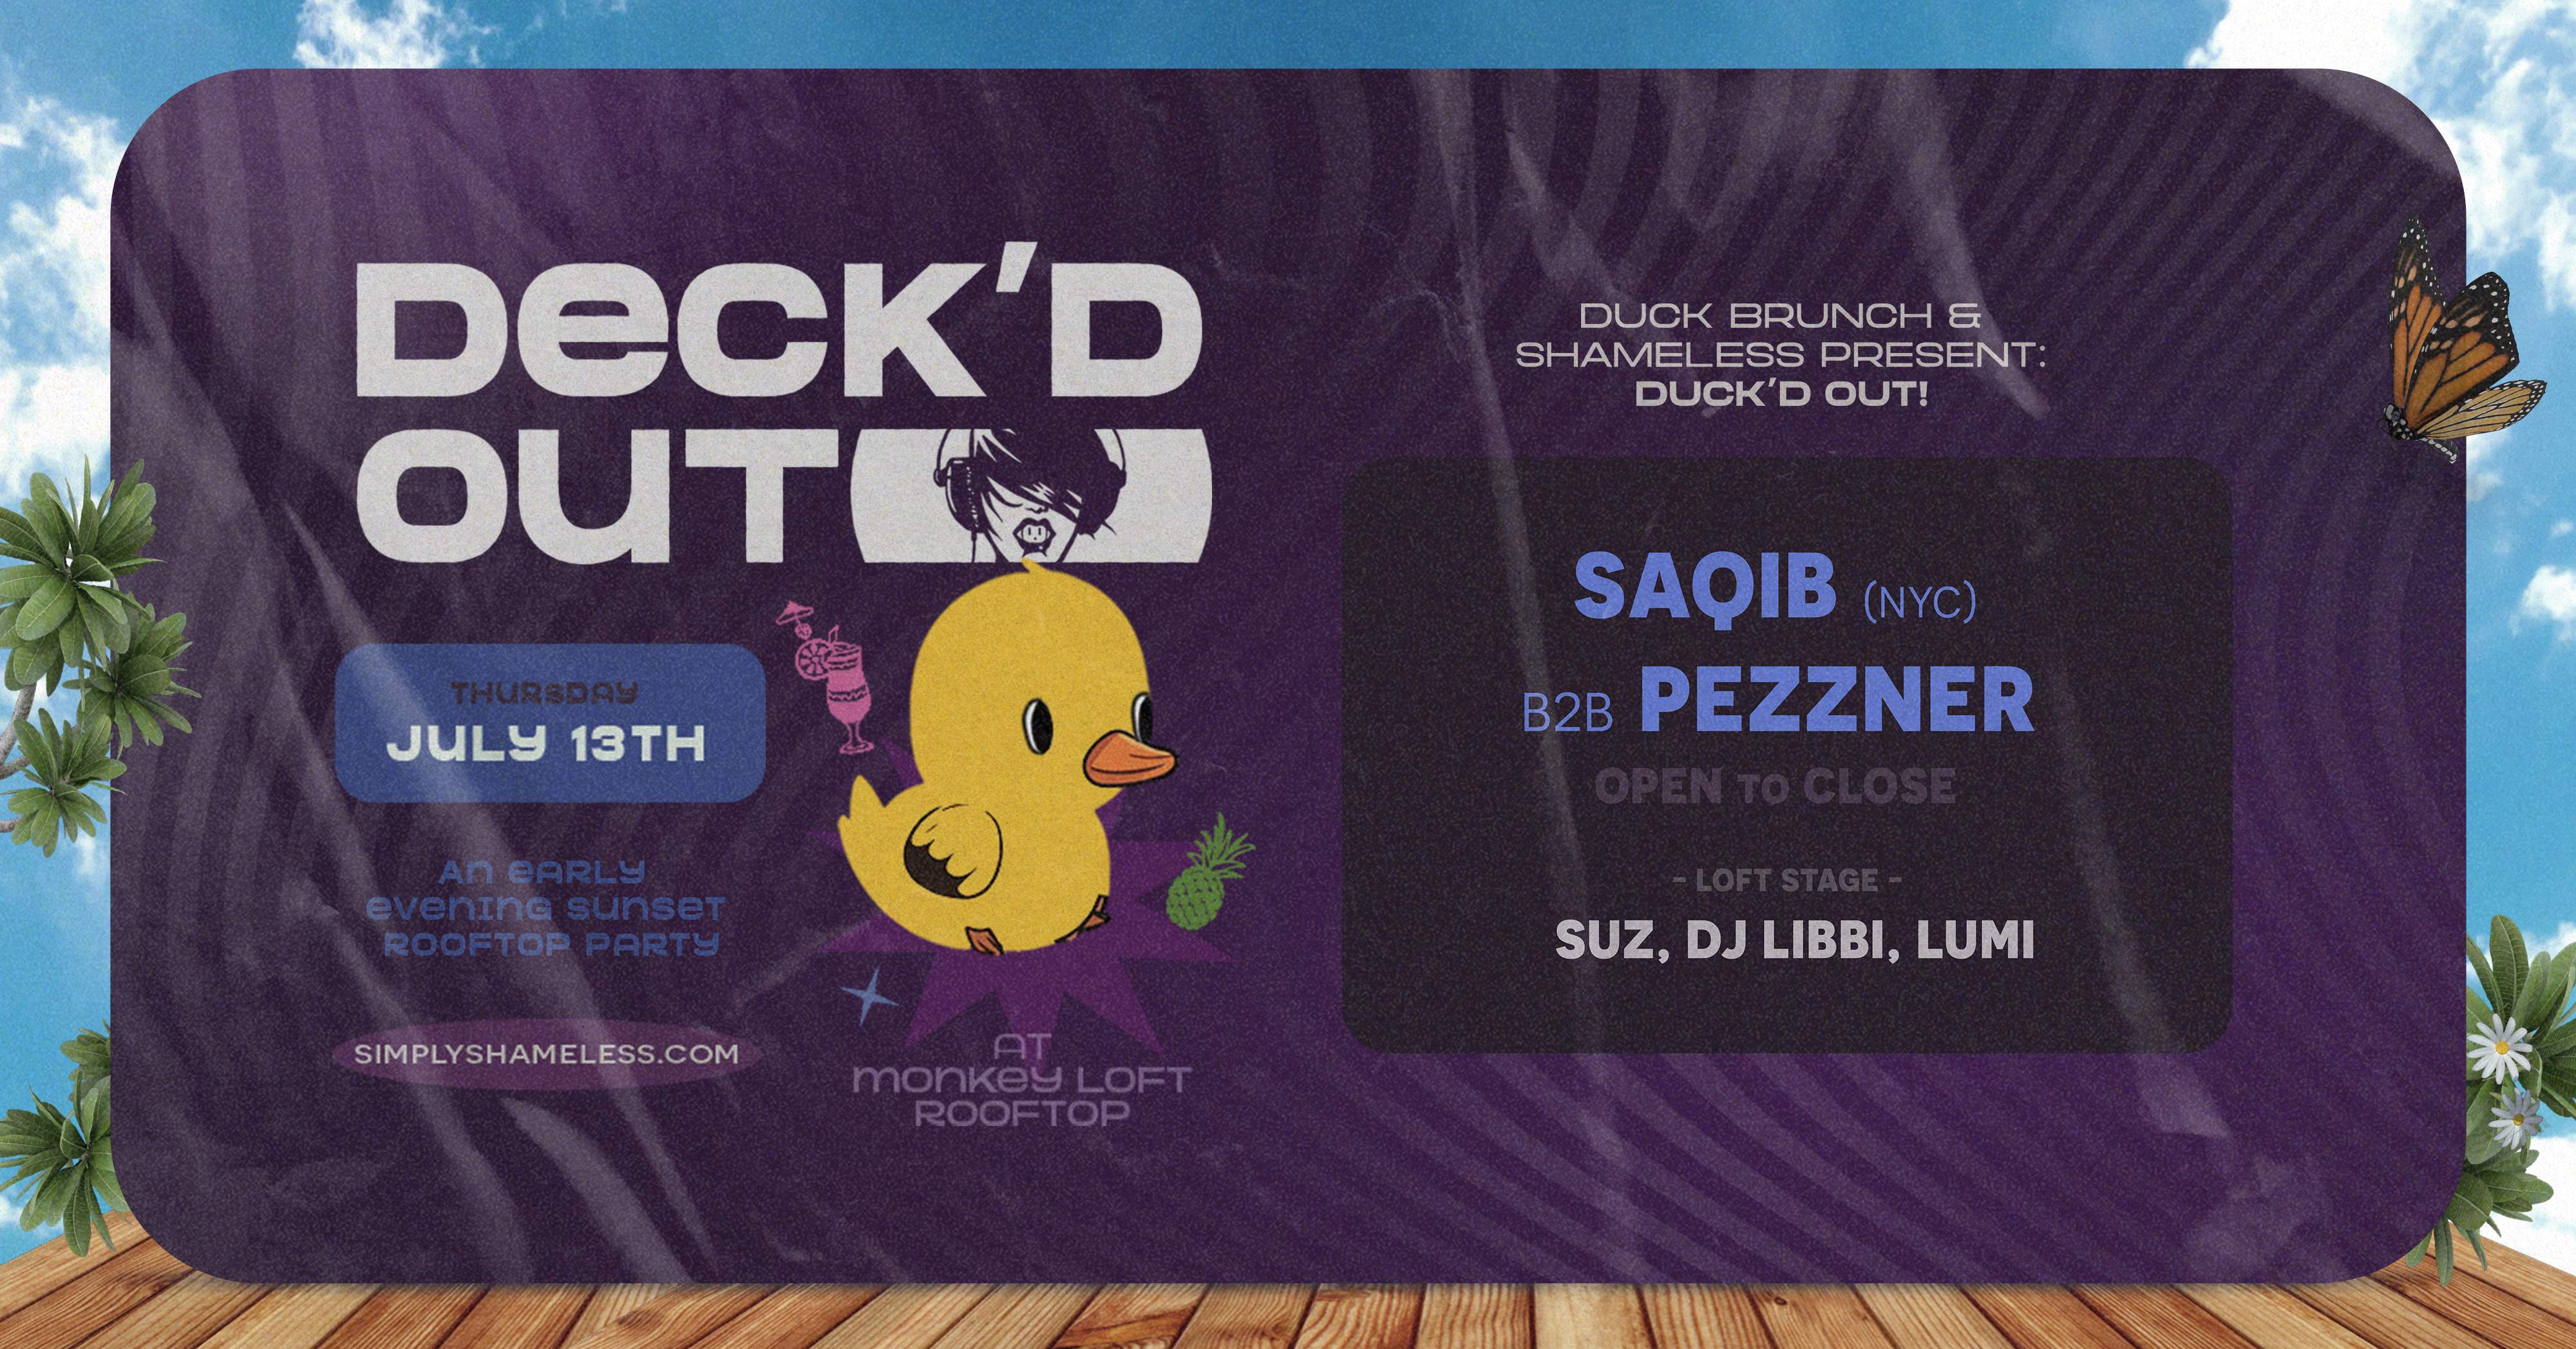 Duck'd Out #3 with Saqib (NYC) B2B Pezzner Open to Close + more - フライヤー表